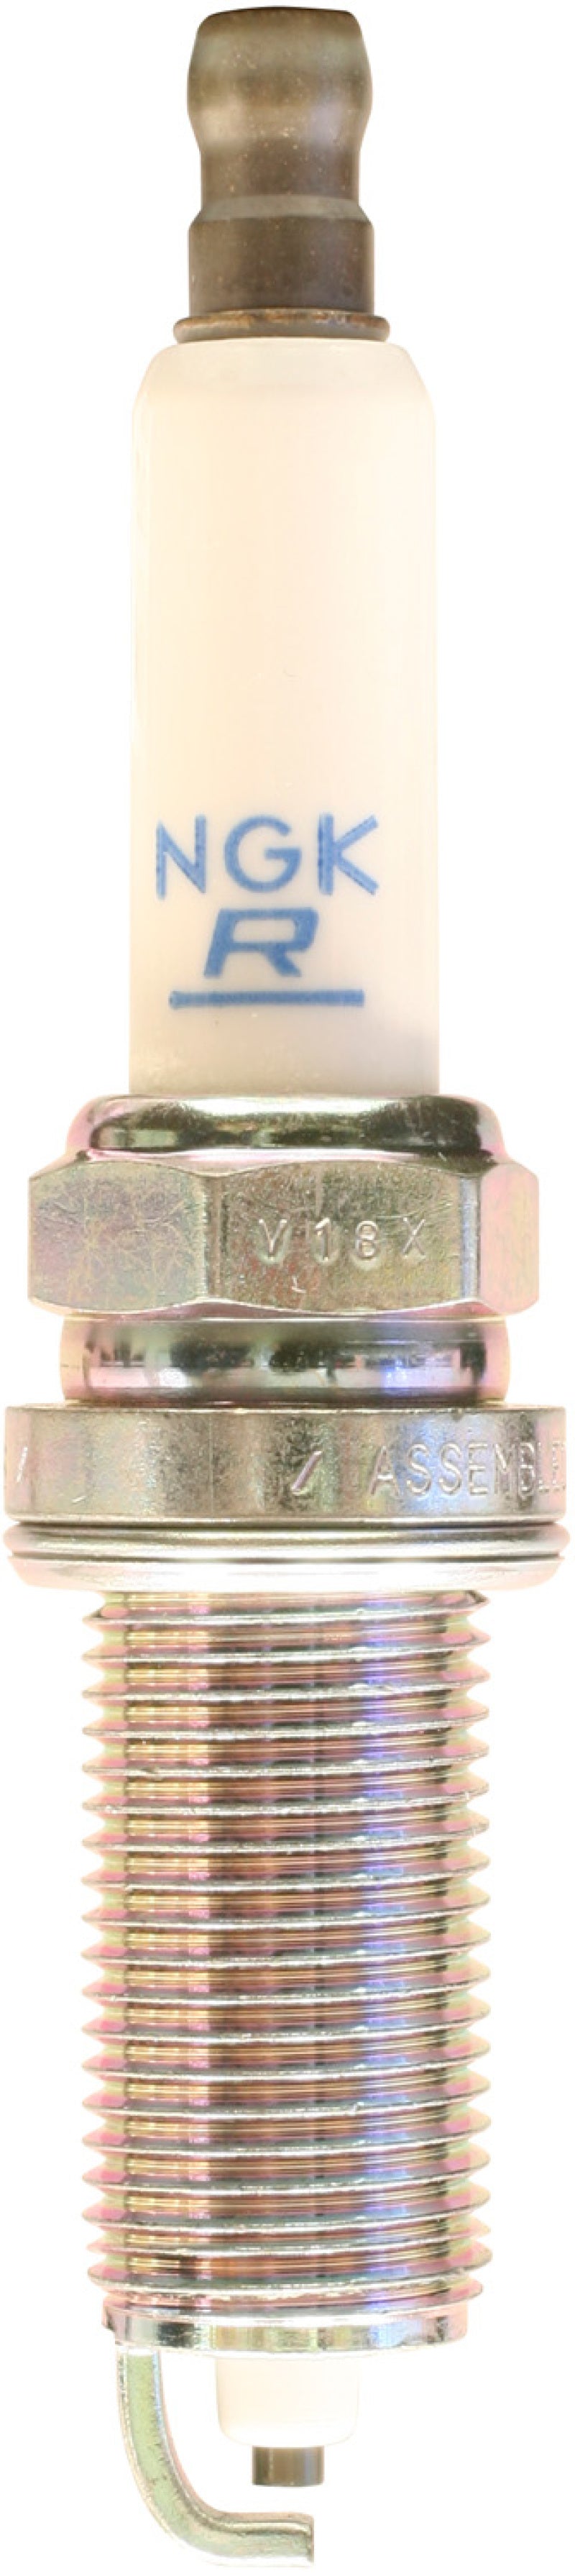 NGK Nickel Spark Plug Box of 4 (LZFR5C-11) -  Shop now at Performance Car Parts